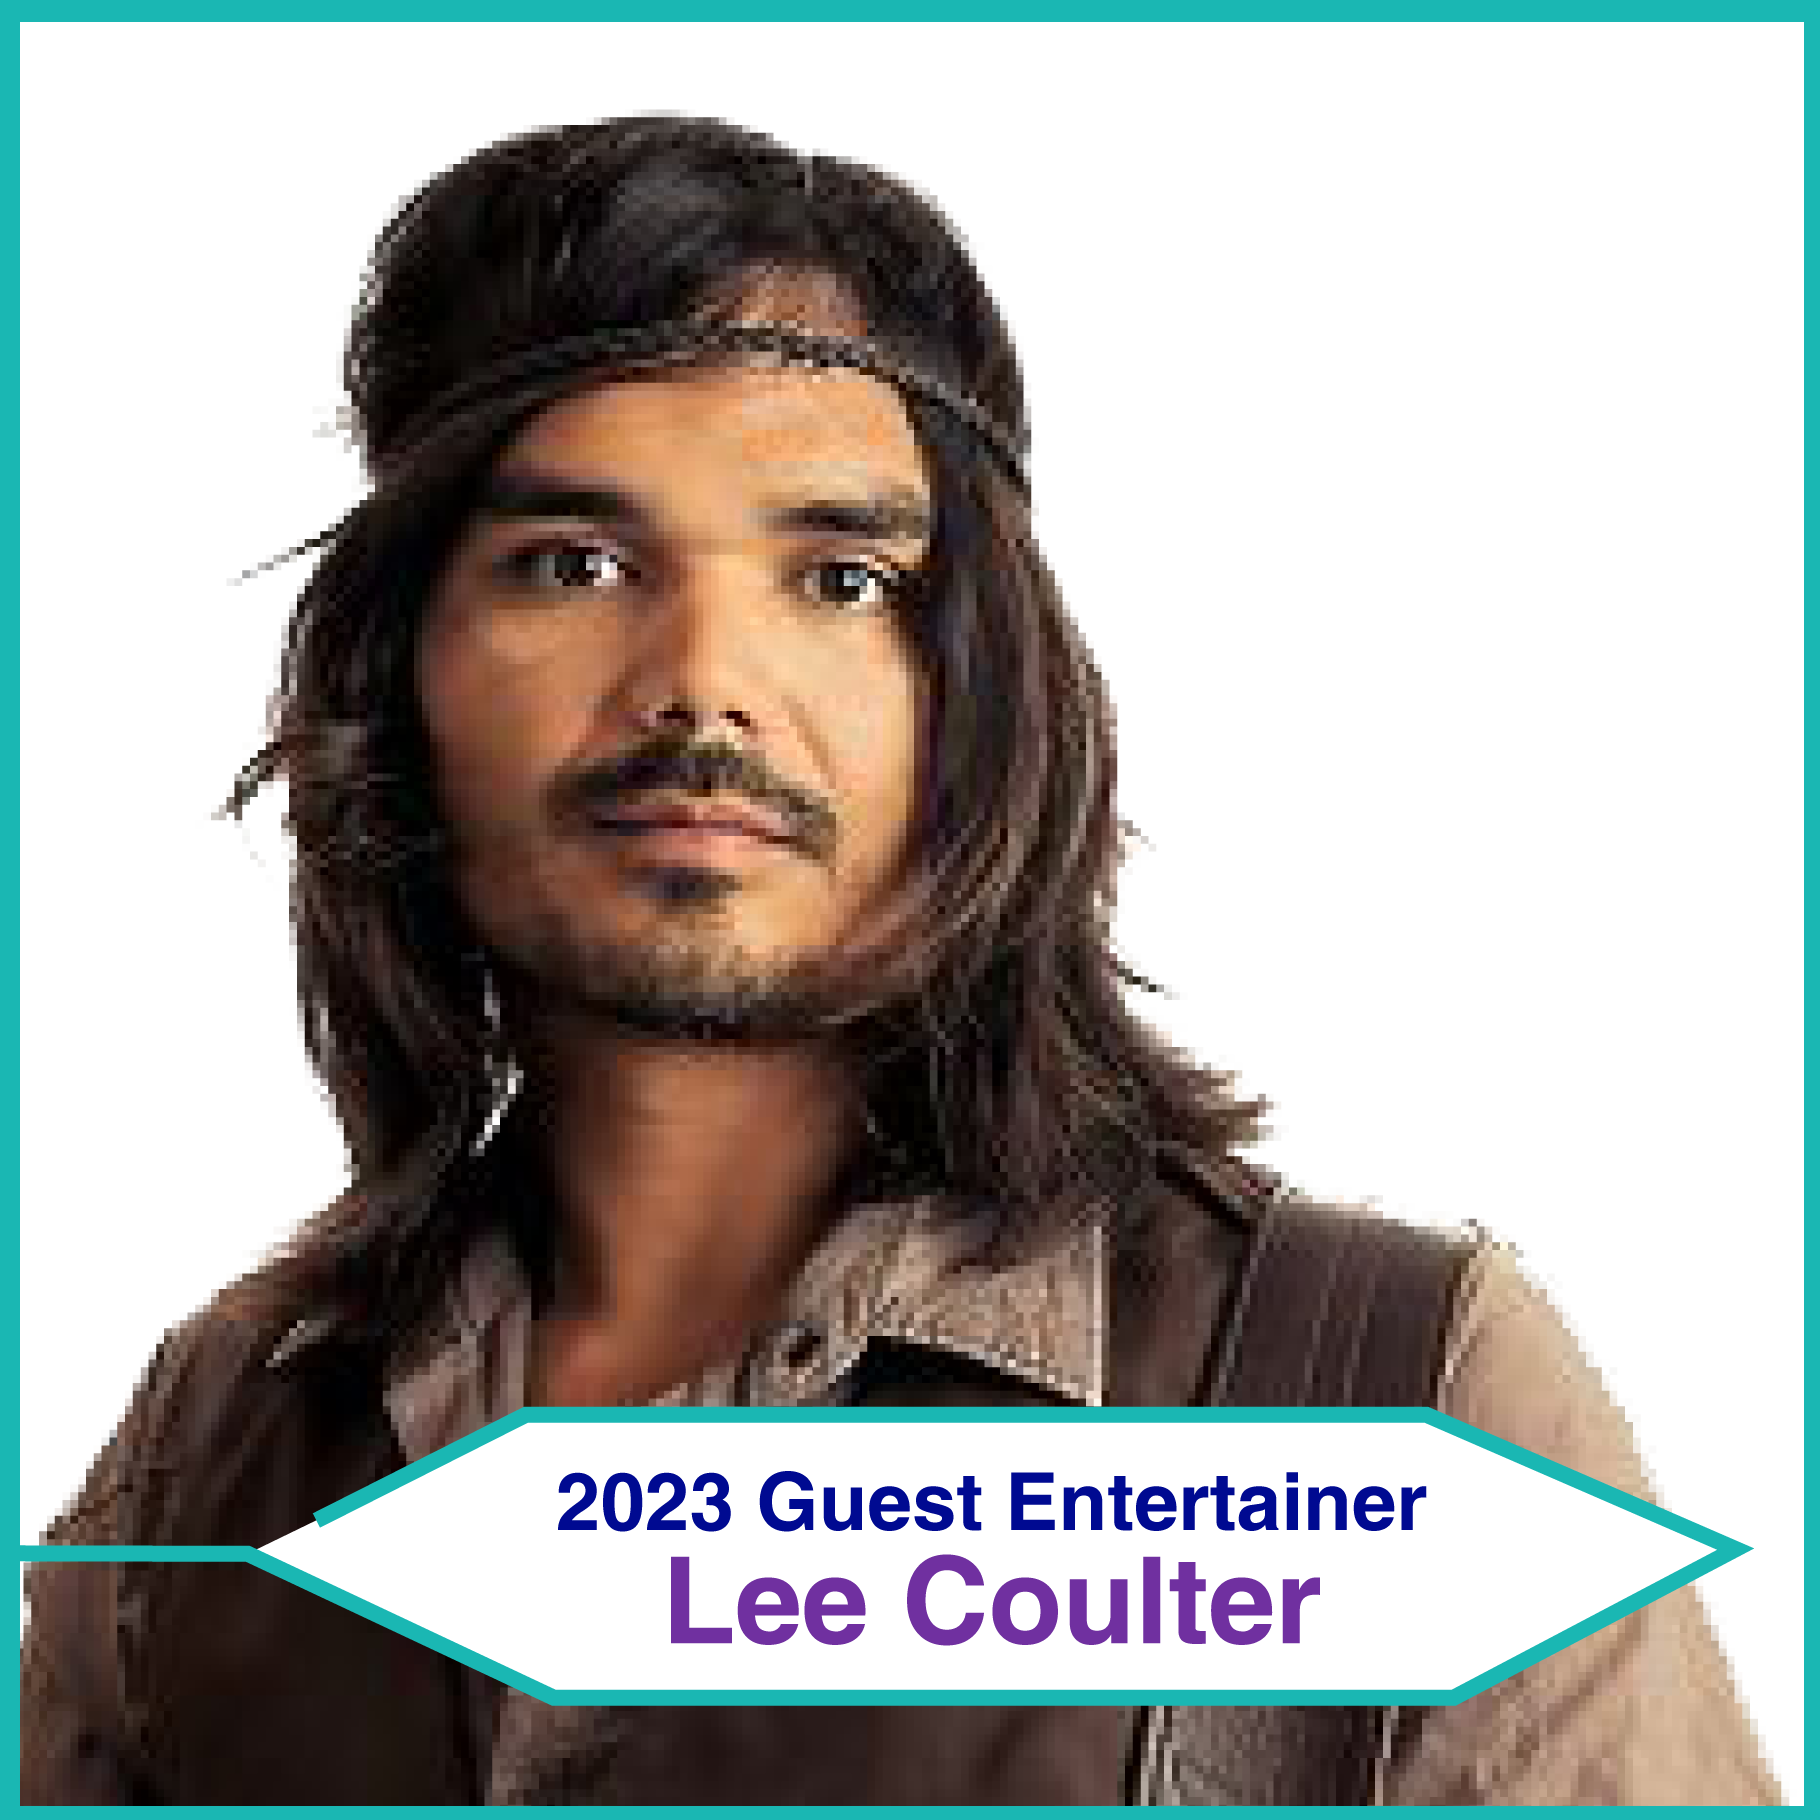 https://digifesttemecula.org/wp-content/uploads/2023/02/Lee_Coulter.png